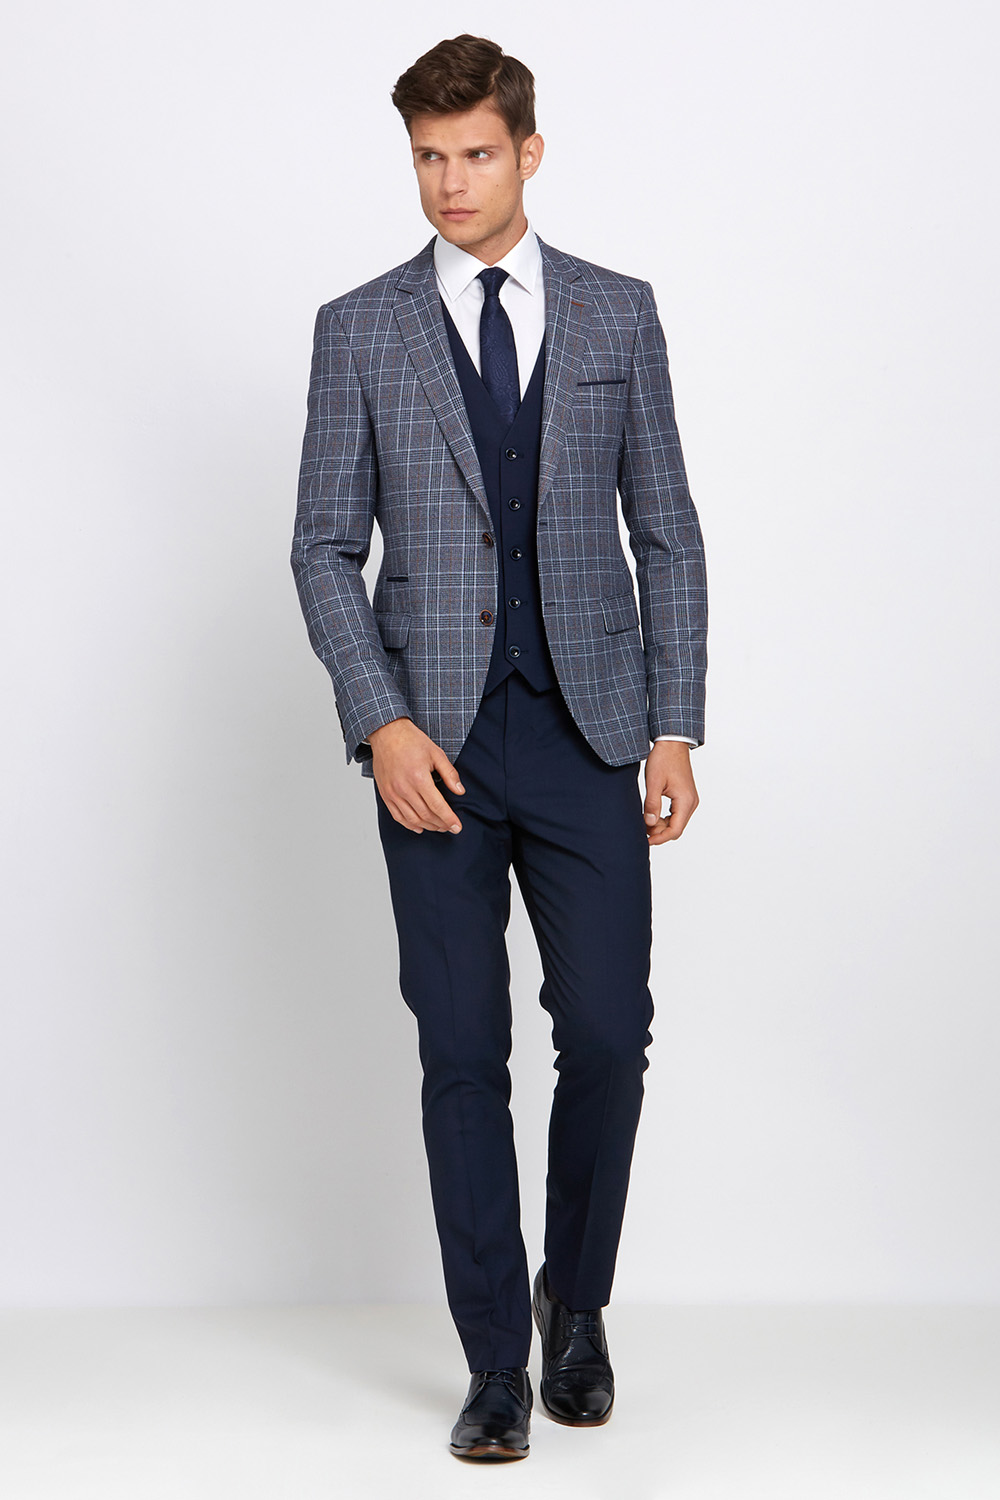 Gordon Grey Check 3 Piece Suit Tom Murphy's Formal and